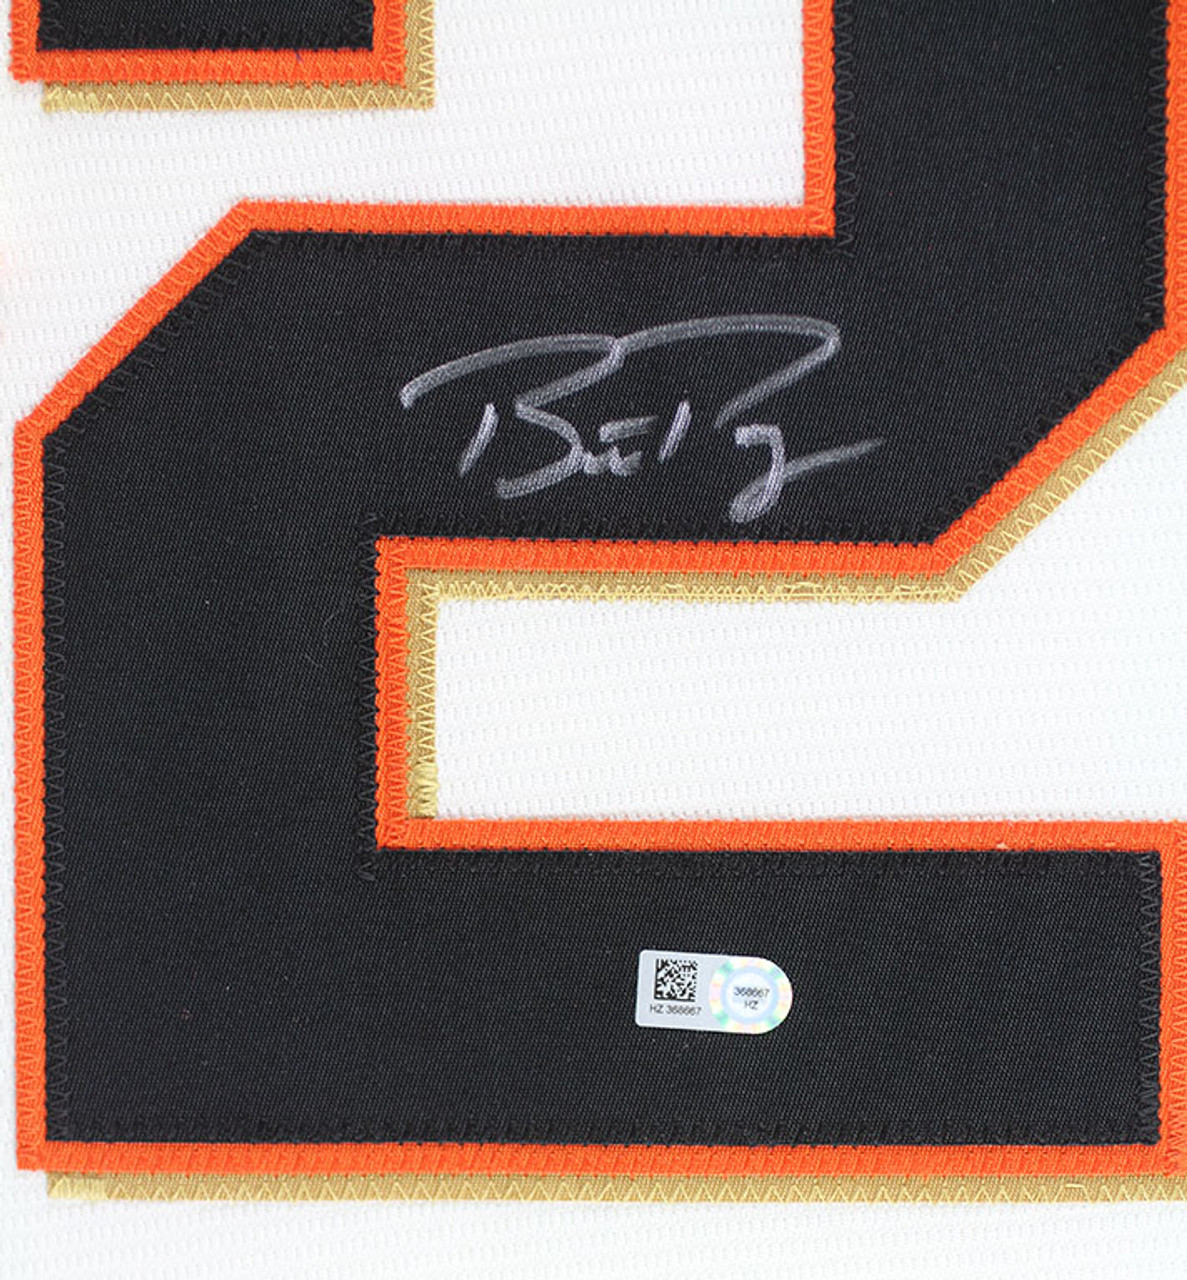 Buster Posey Signed Jersey (MLB)